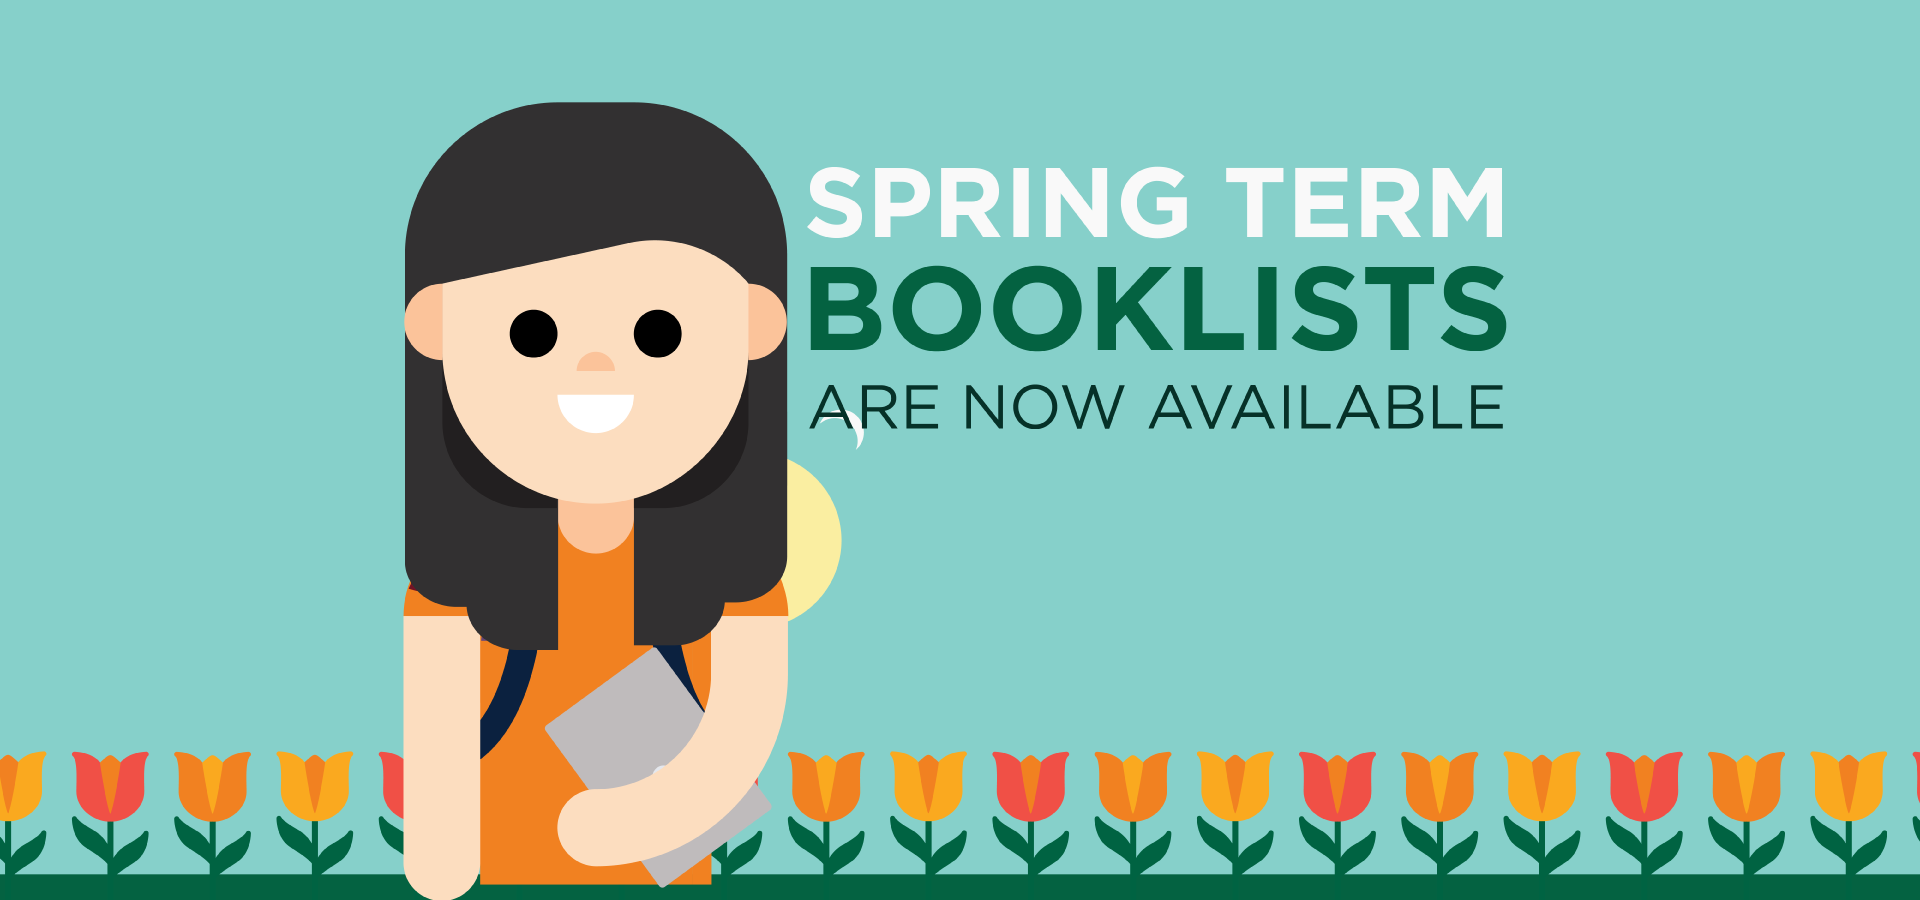 Spring Term Booklists Now Available.